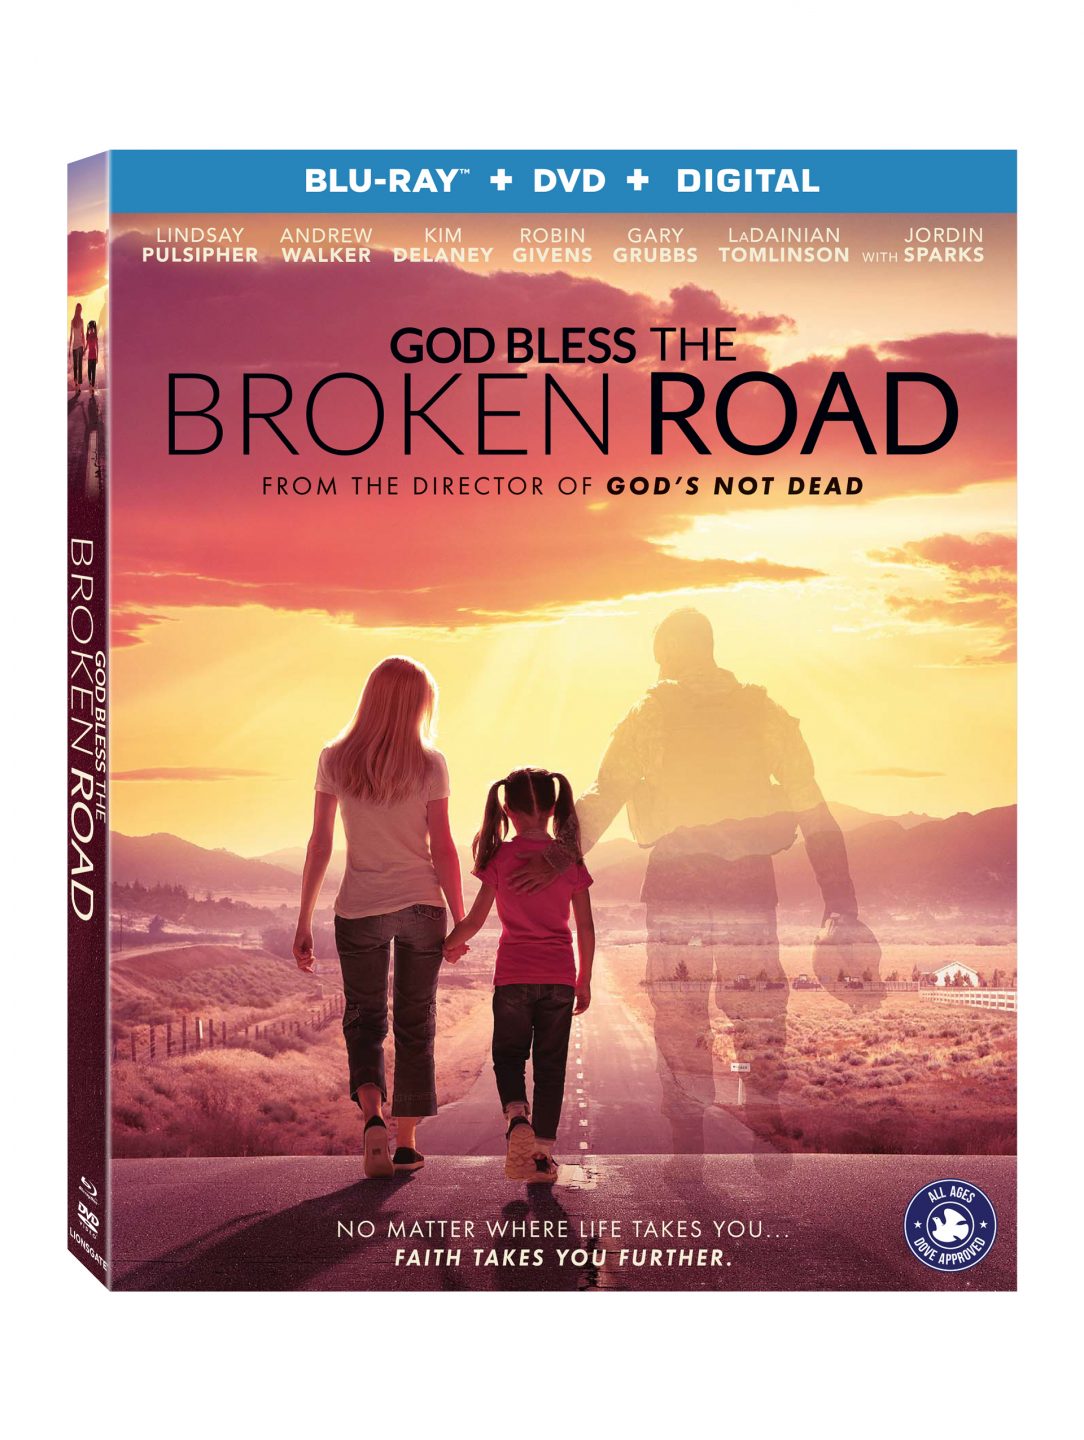 God Bless The Broken Road Blu-Ray Combo Pack cover (Lionsgate Home Entertainment)